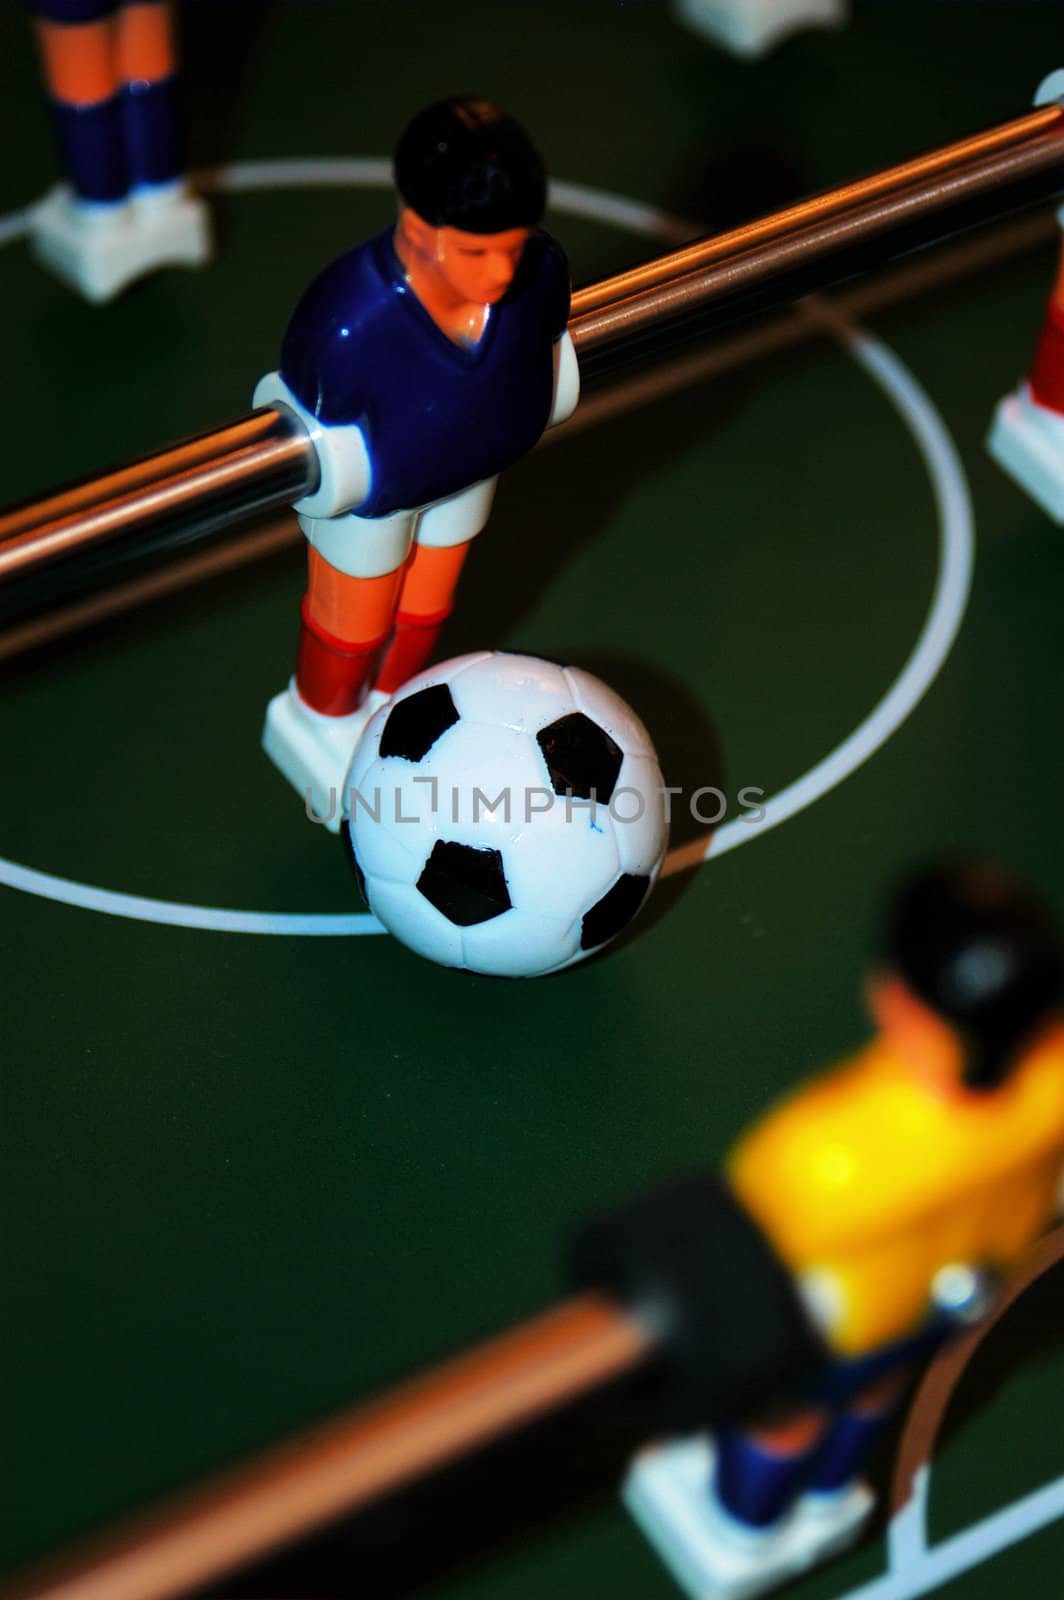 man in a blue top on a foosball game